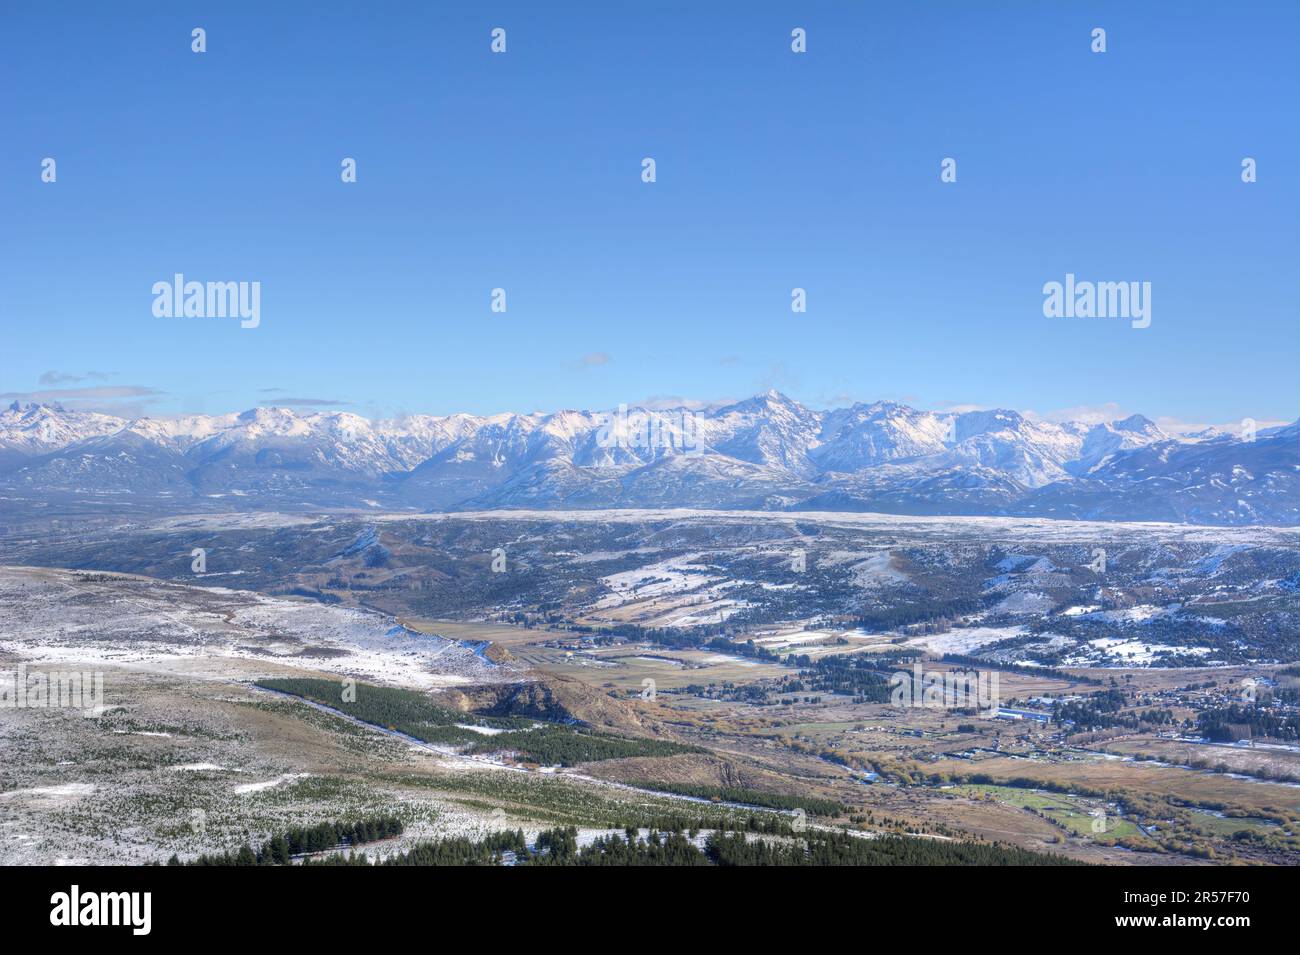 Landscapes of Esquel and surroundings, Argentina Stock Photo